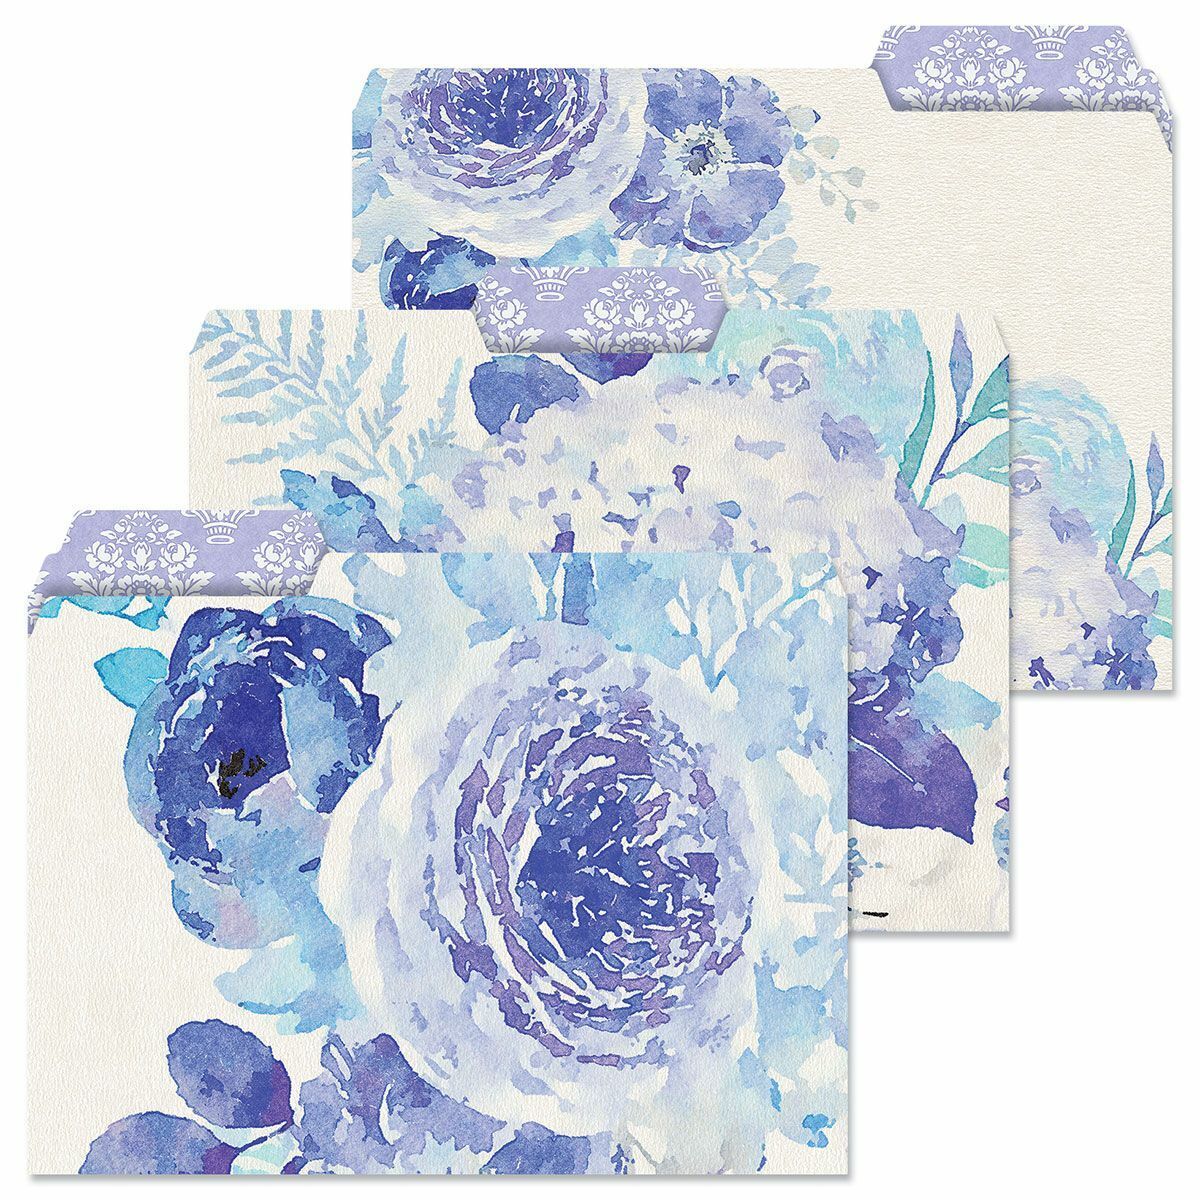 Decorative Blue Flower Floral File Milwaukee Mall Folders Max 67% OFF of Designs 12 Set Doc